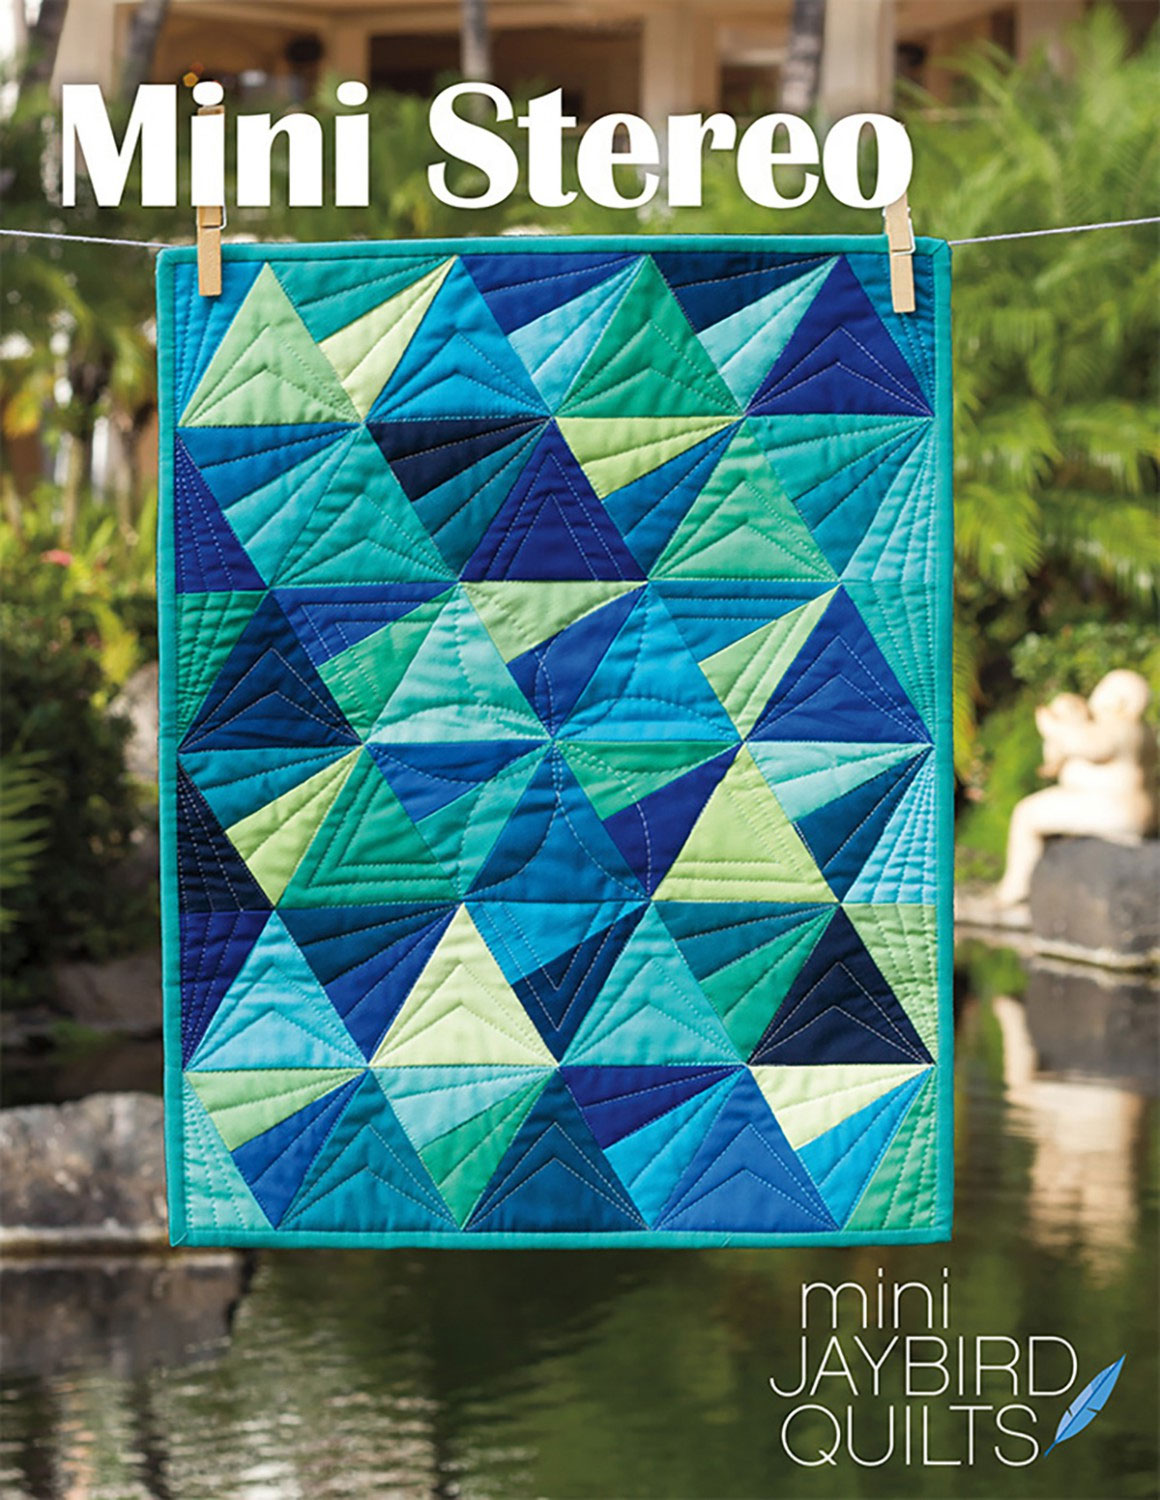 Mini-Stereo-quilt-sewing-pattern-Julie-Herman-front